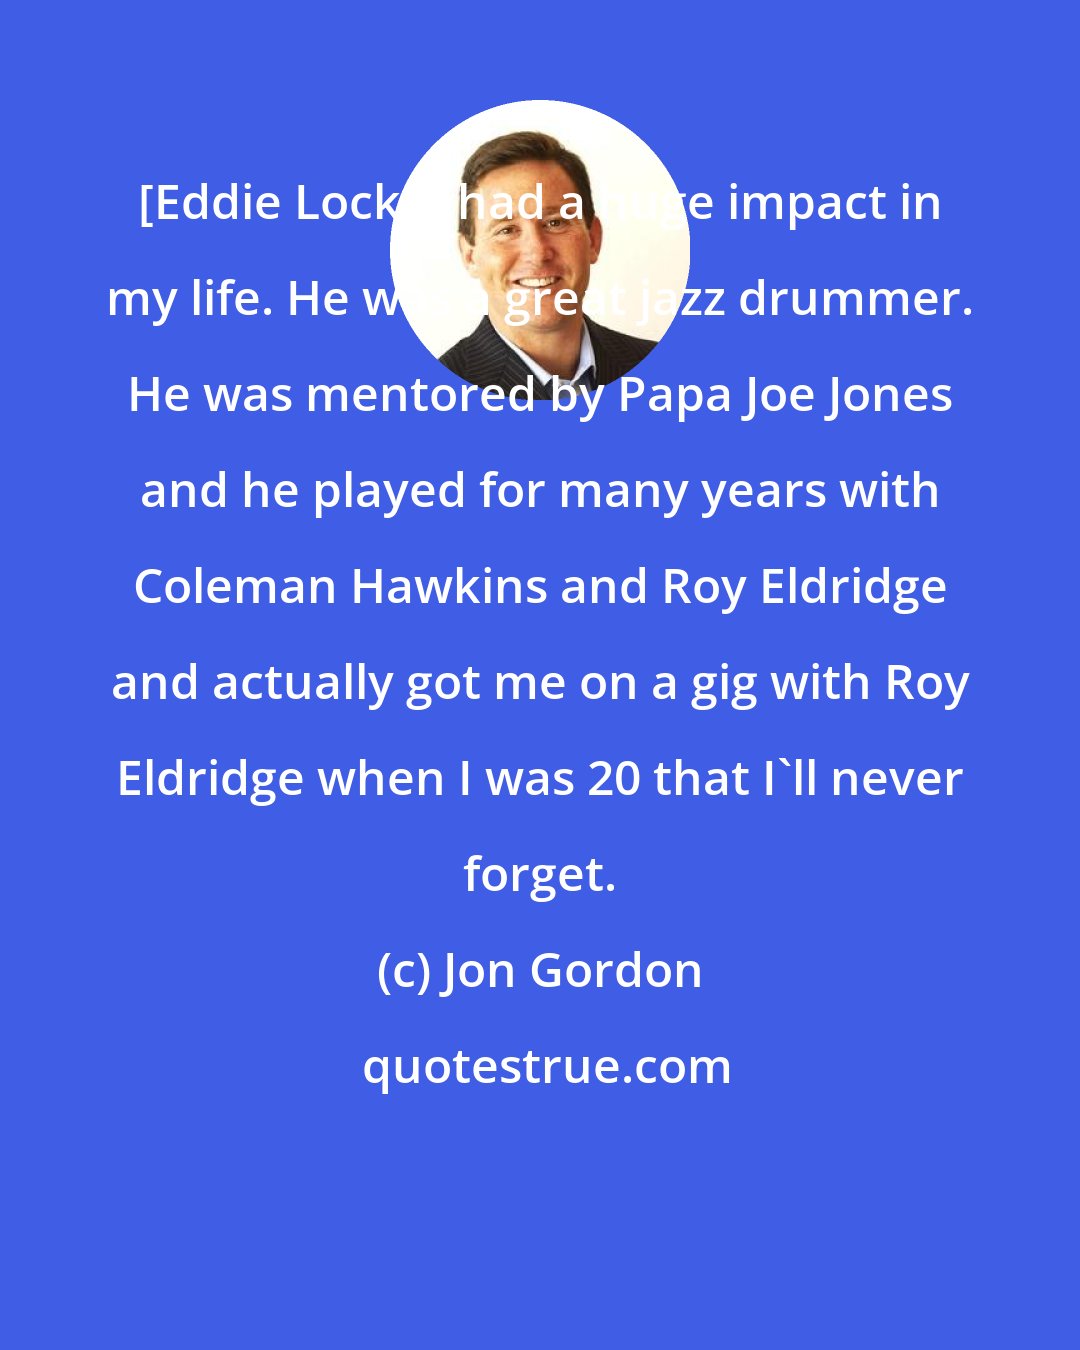 Jon Gordon: [Eddie Locke] had a huge impact in my life. He was a great jazz drummer. He was mentored by Papa Joe Jones and he played for many years with Coleman Hawkins and Roy Eldridge and actually got me on a gig with Roy Eldridge when I was 20 that I'll never forget.